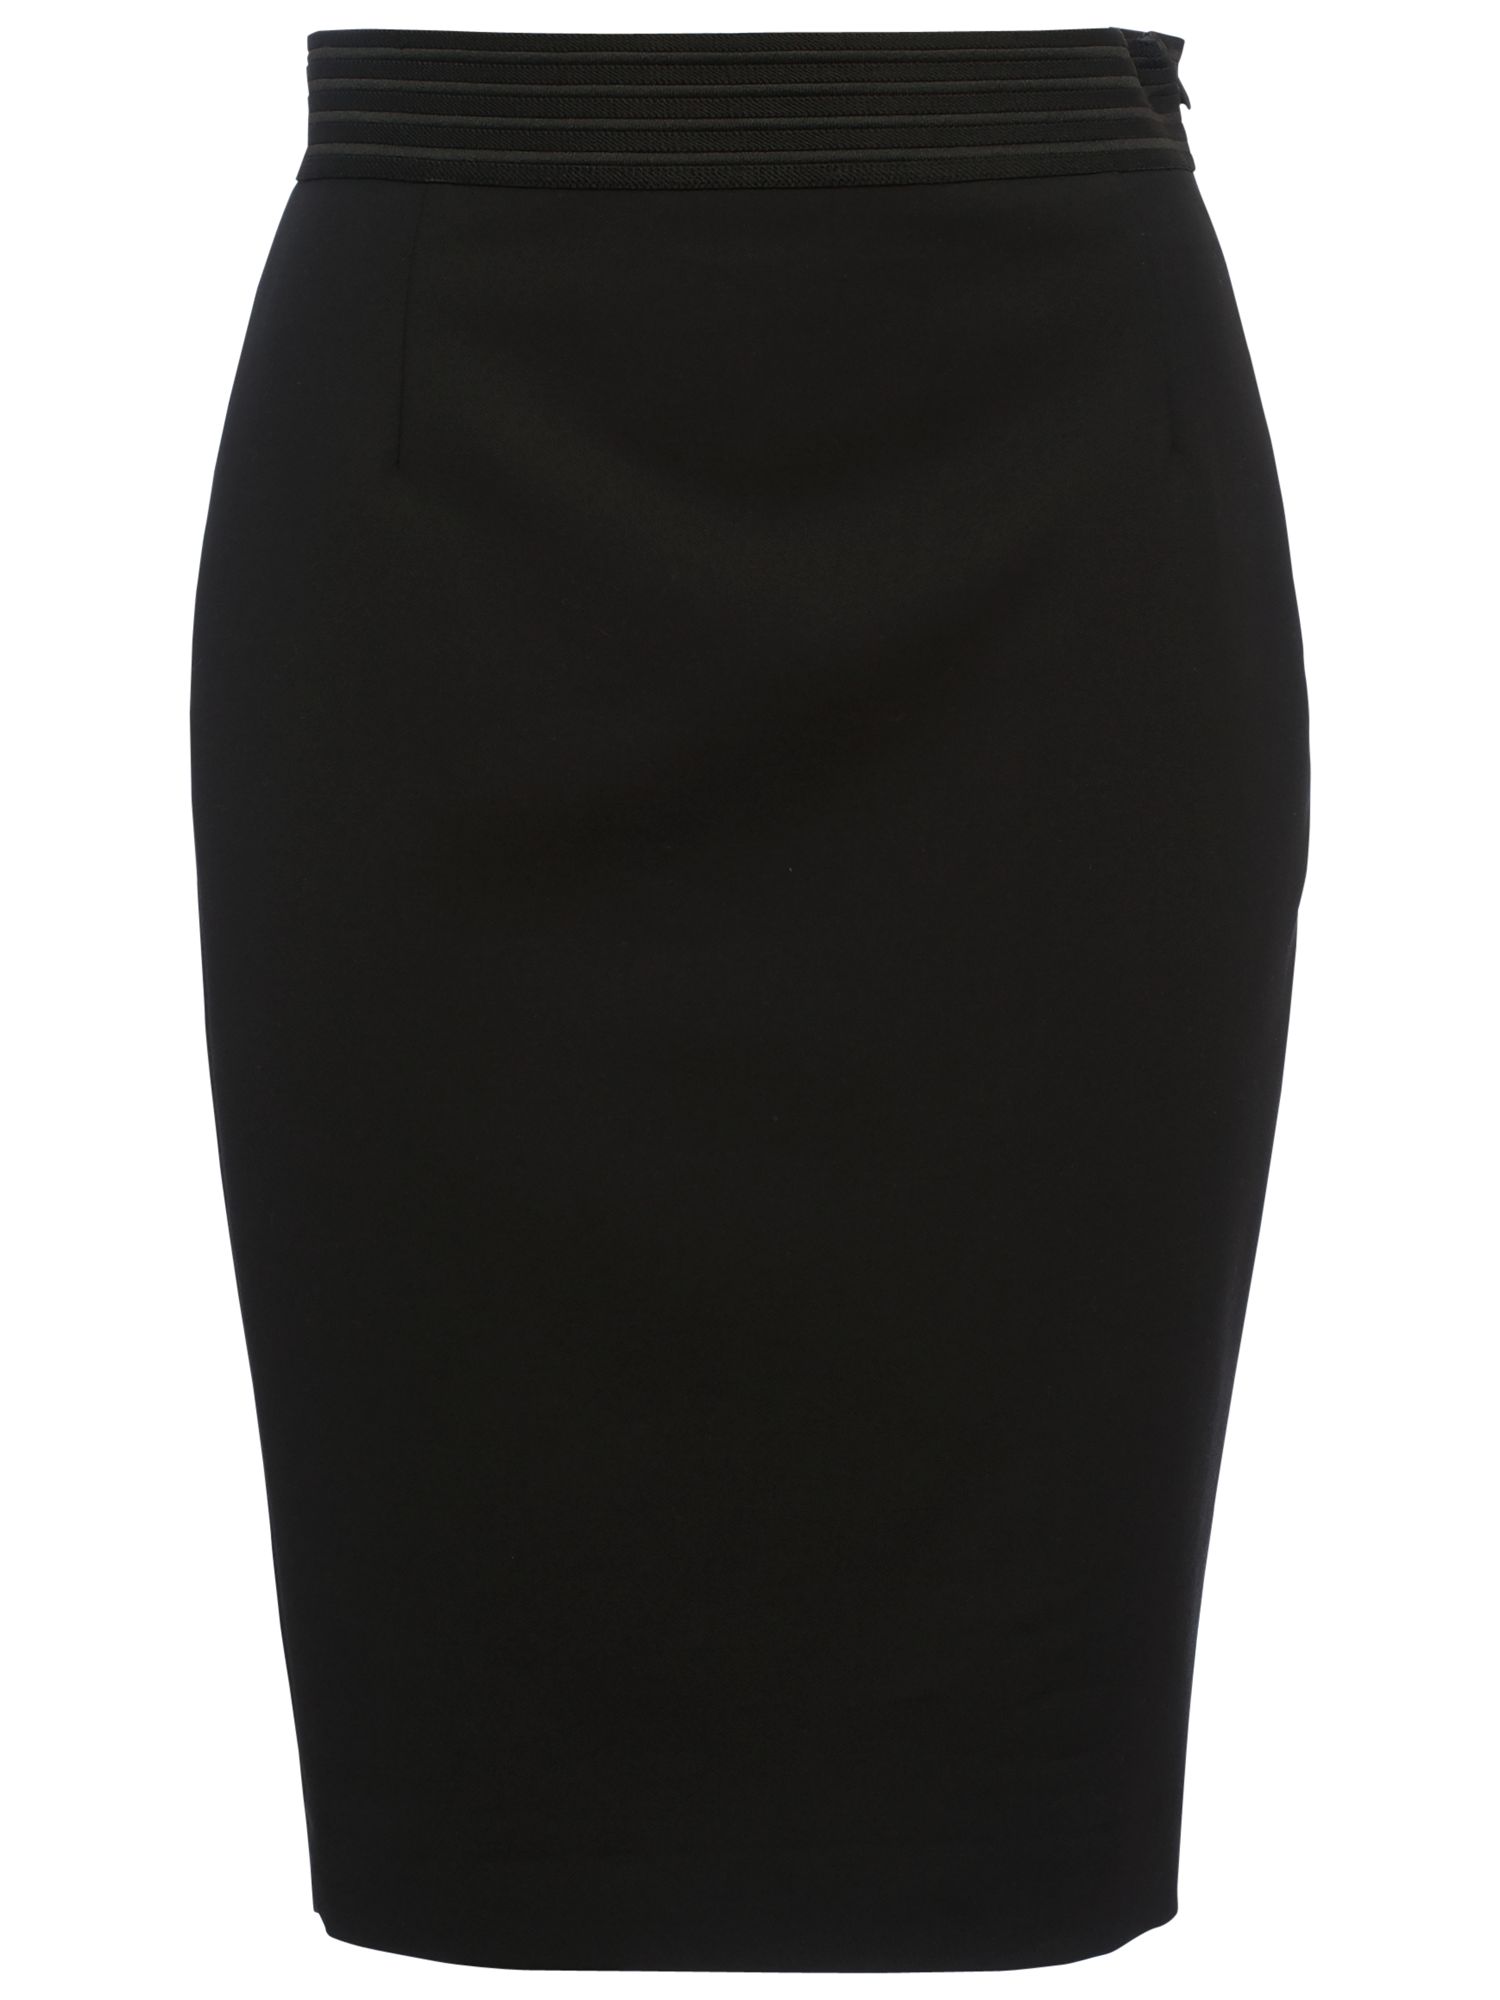 French Connection Glass Stretch Pencil Skirt, Black at John Lewis ...